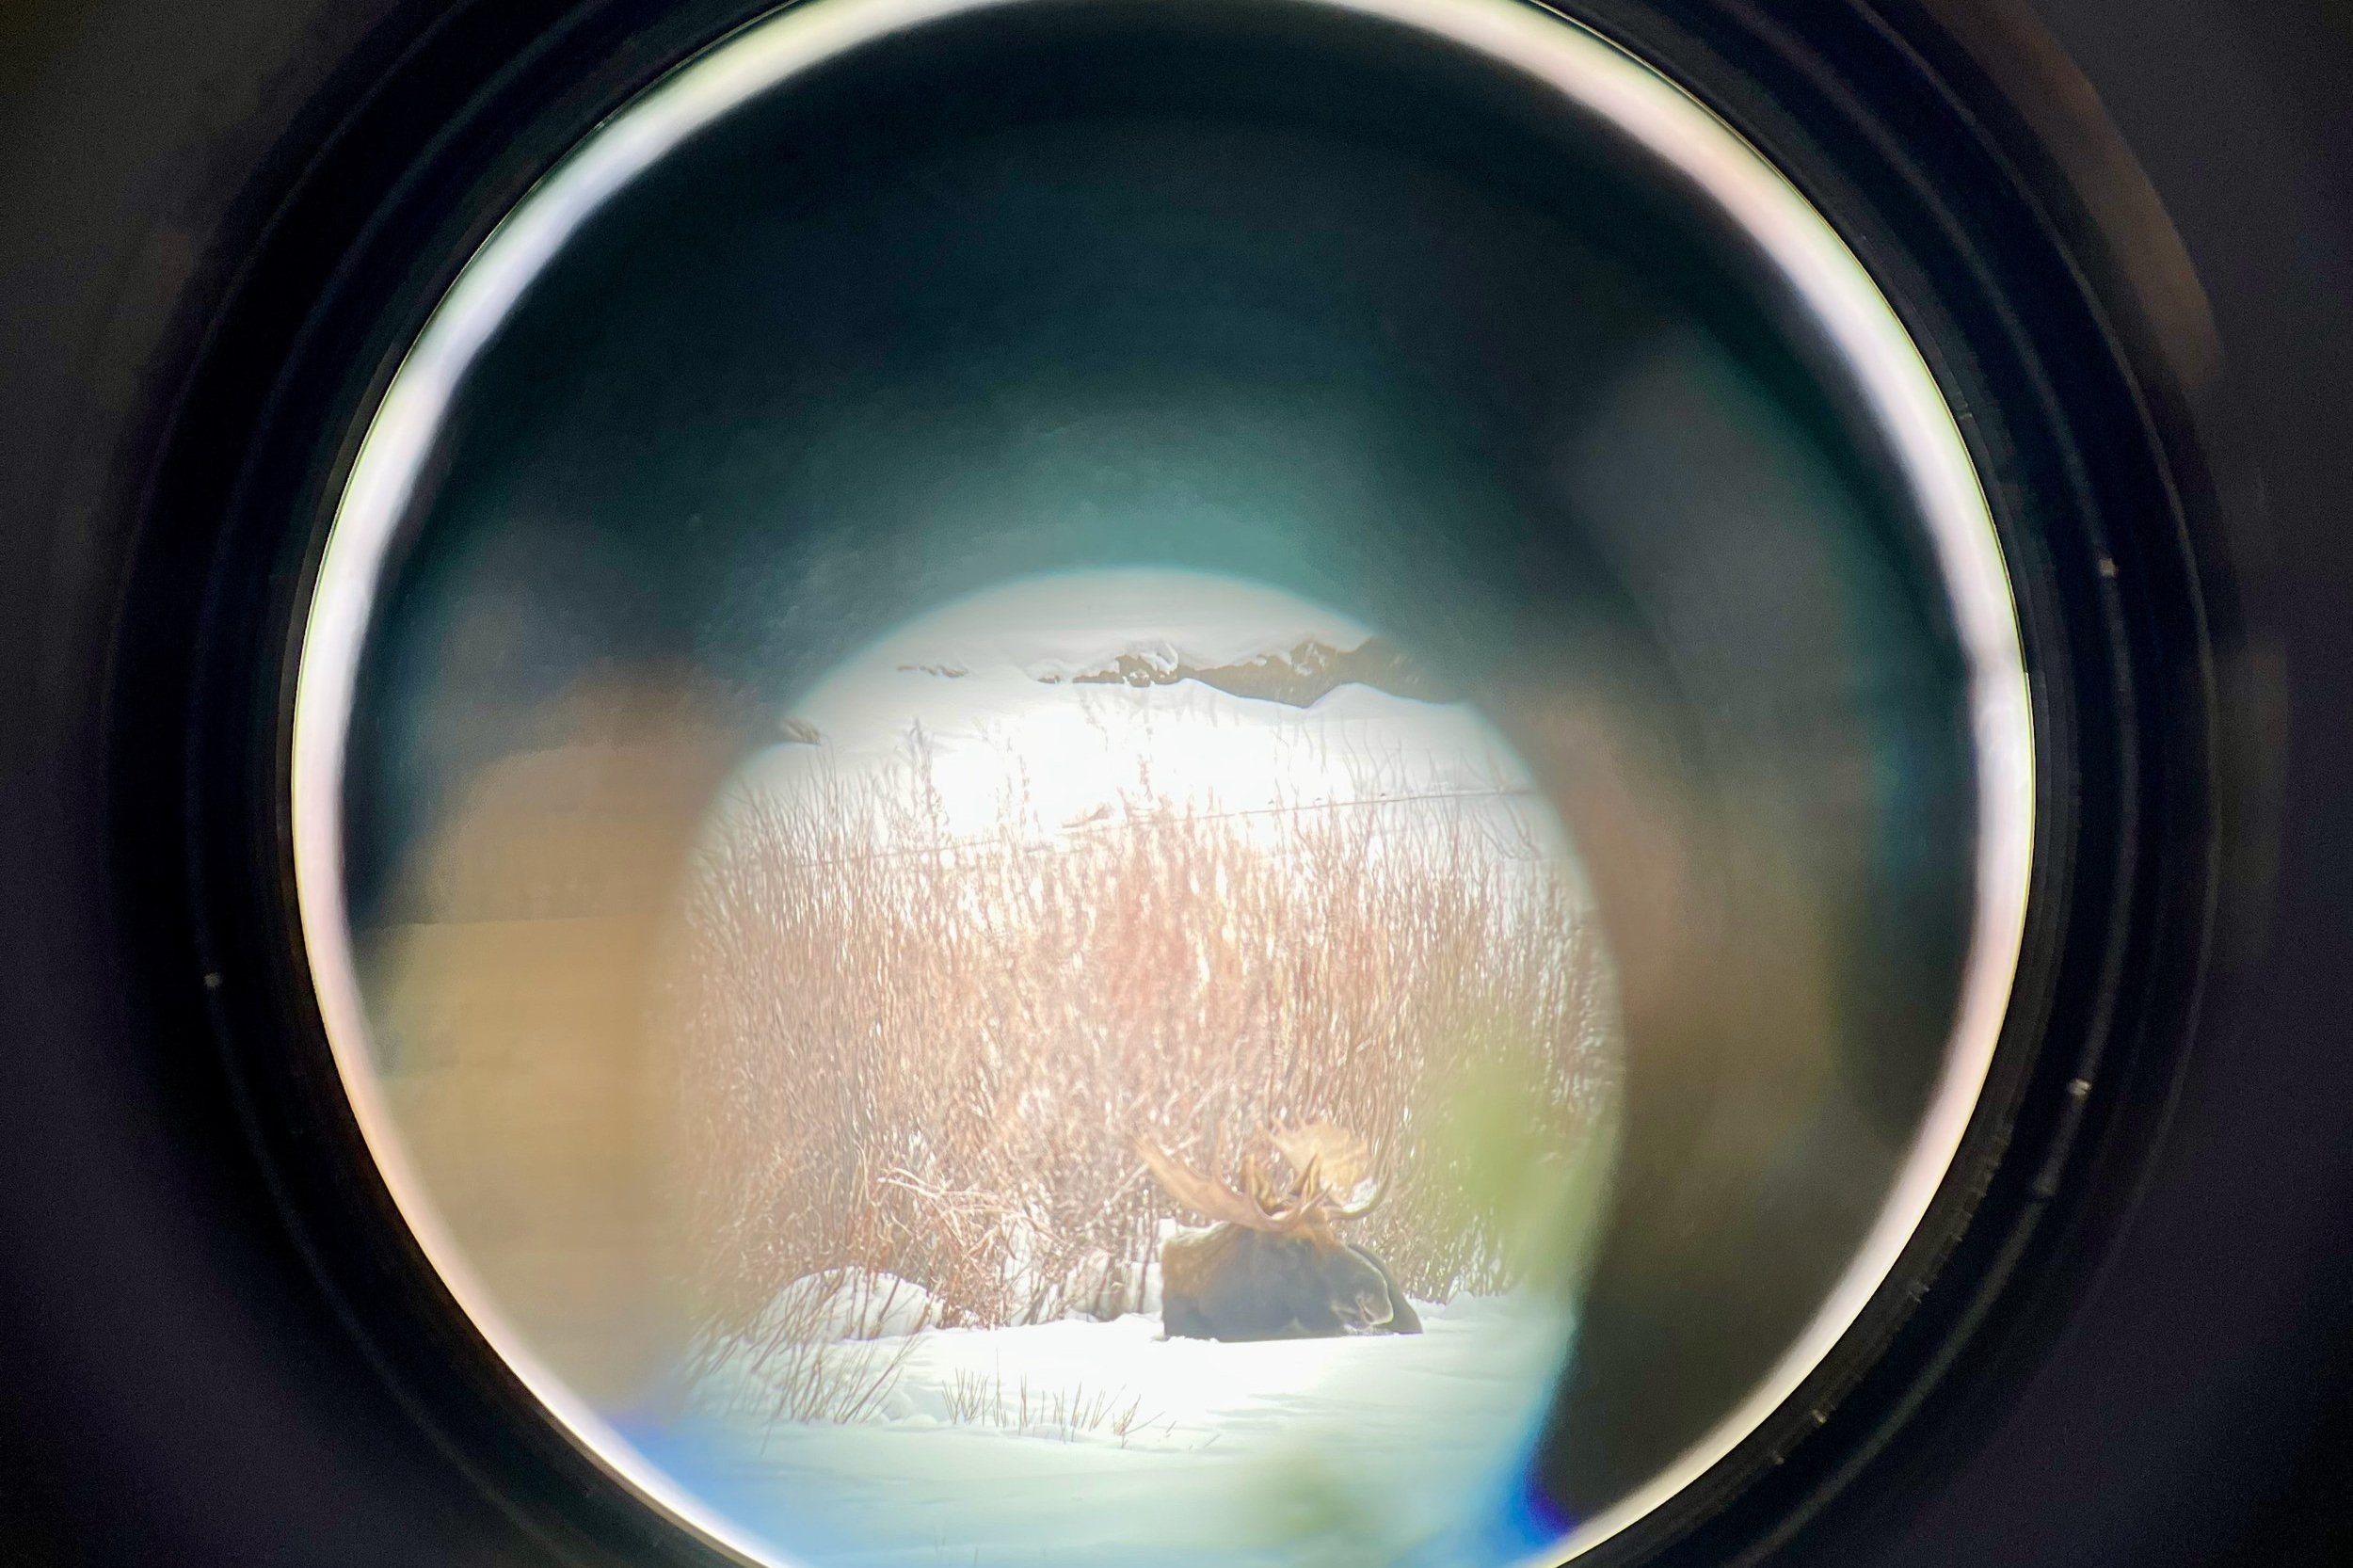 Really dodgy photo down the scope of a moose